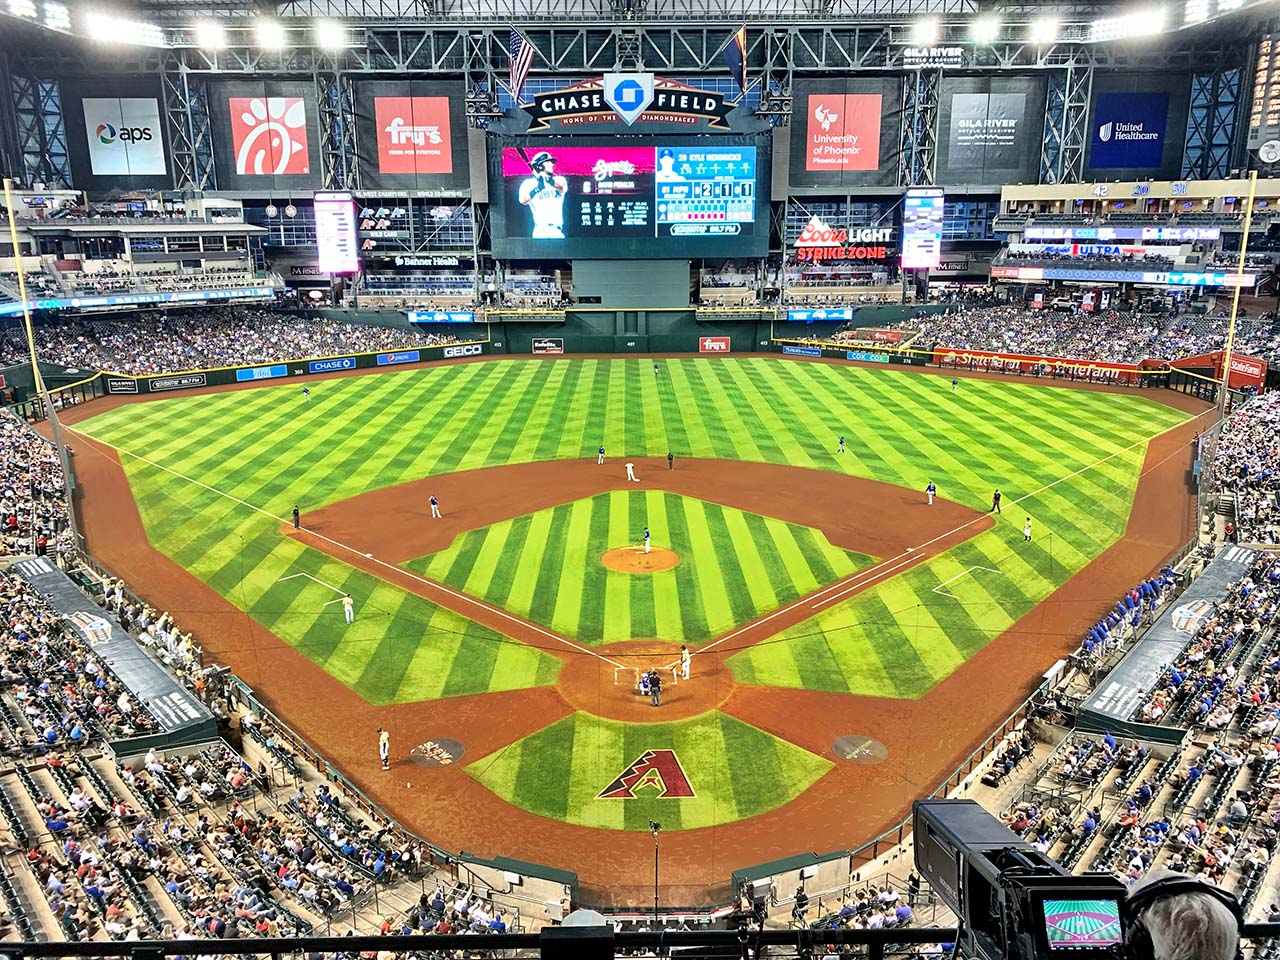 Chase Field renovation still first choice for DBacks owners Ballpark